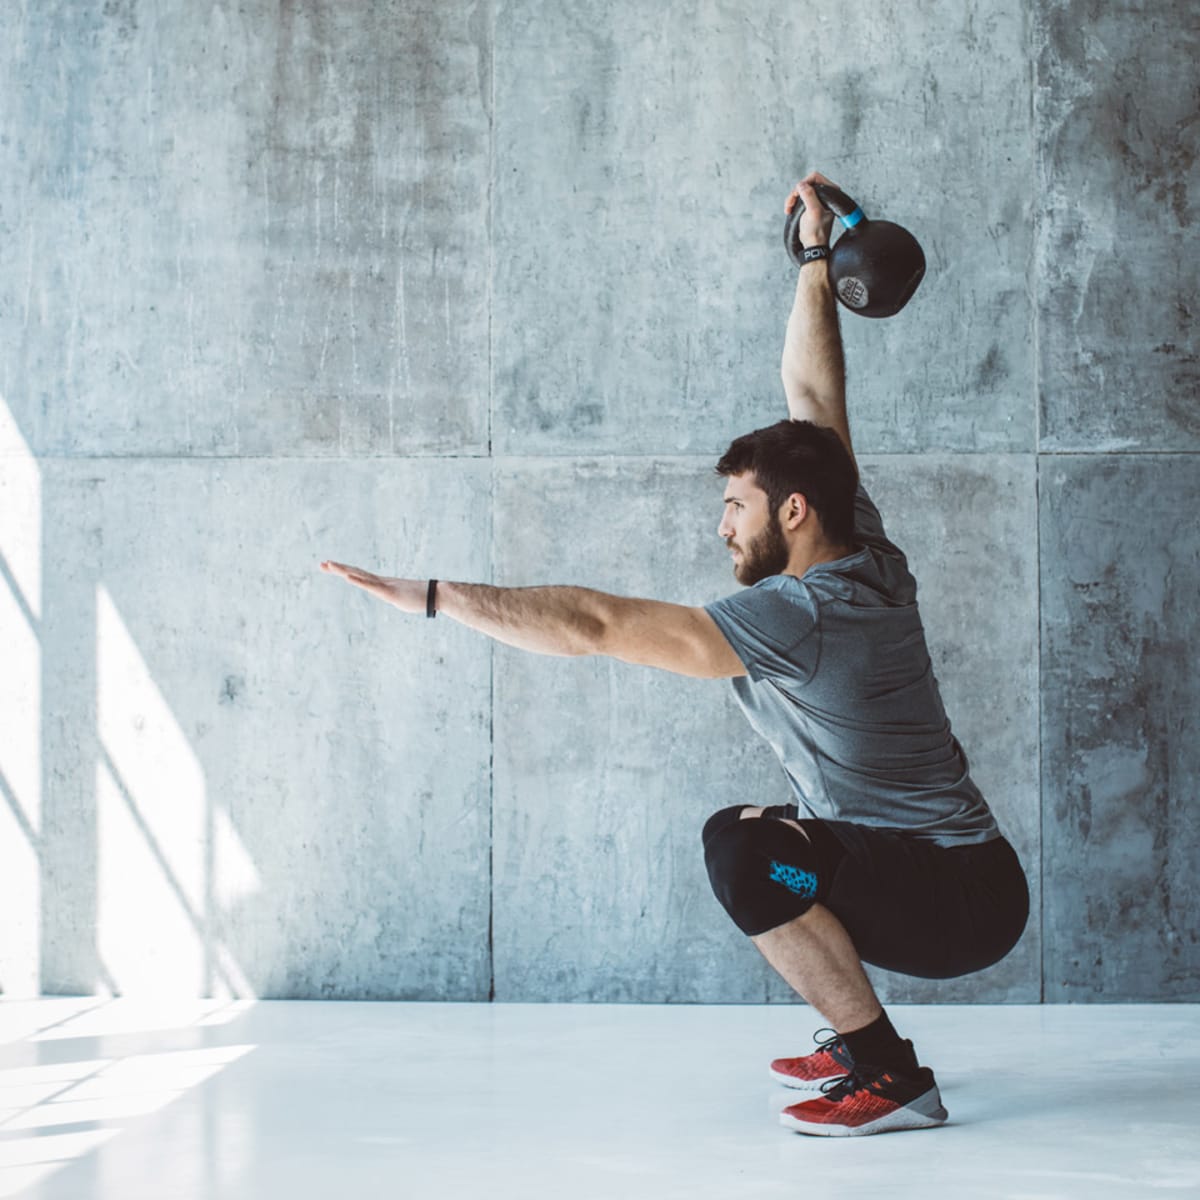 14-Day kettlebell workout plan: An exclusive guide for all levels